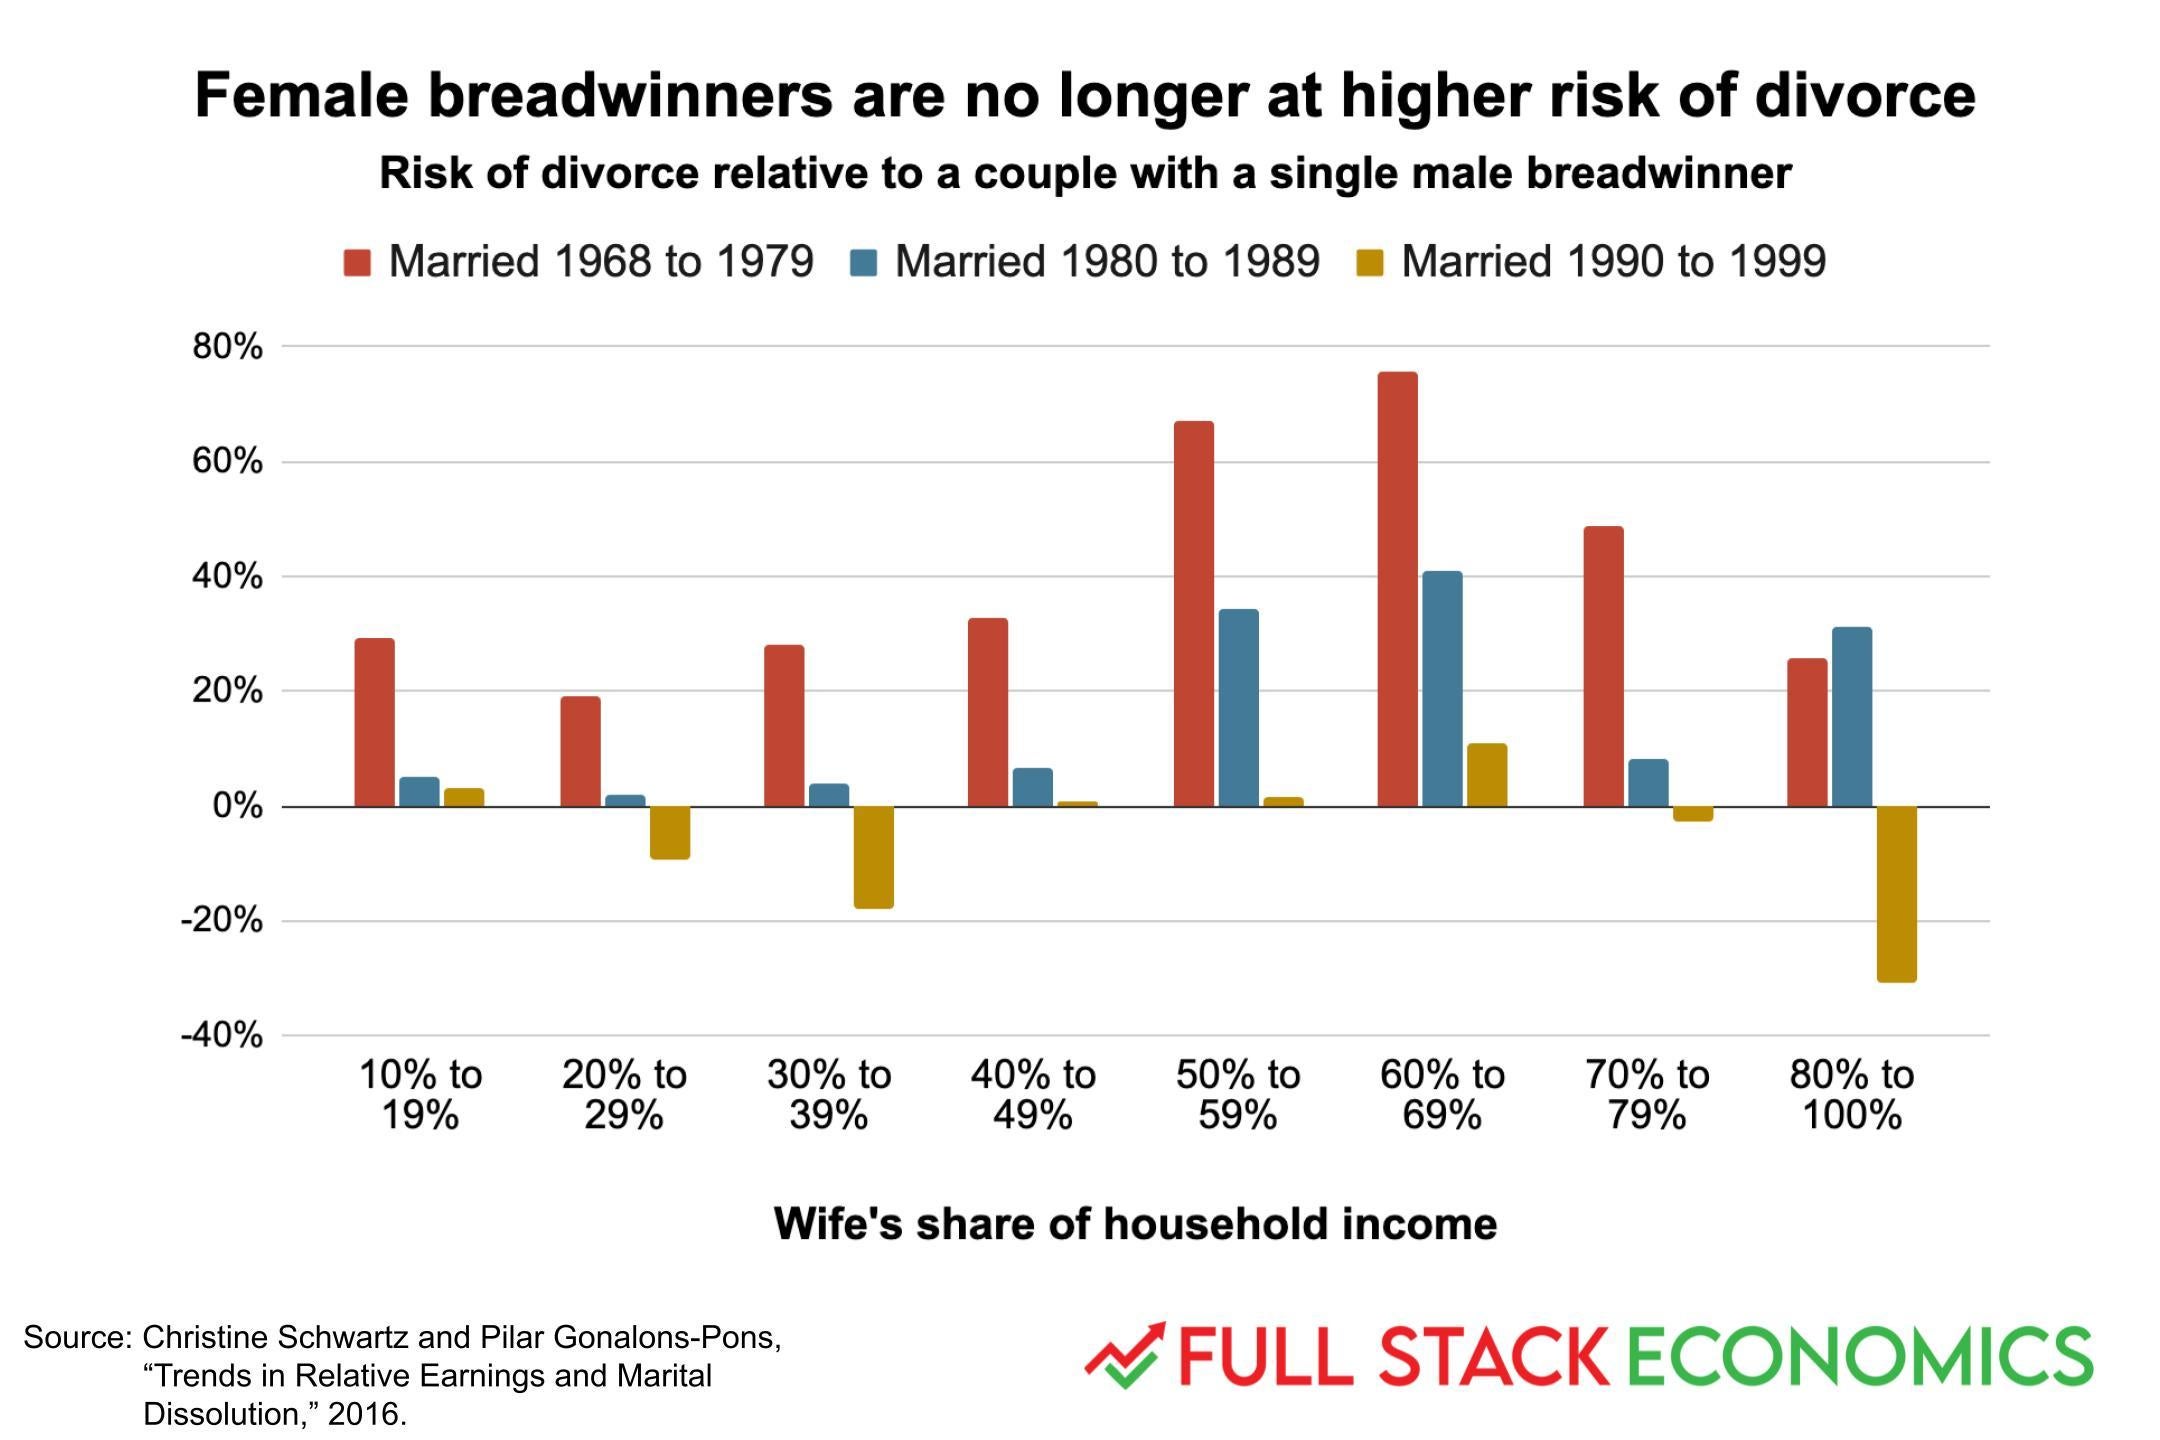 A chart showing that while female-breadwinners couples that married in the 1970s or 1980s were at some higher risk of divorce, this effect has disappeared for couples that married in the 1990s.